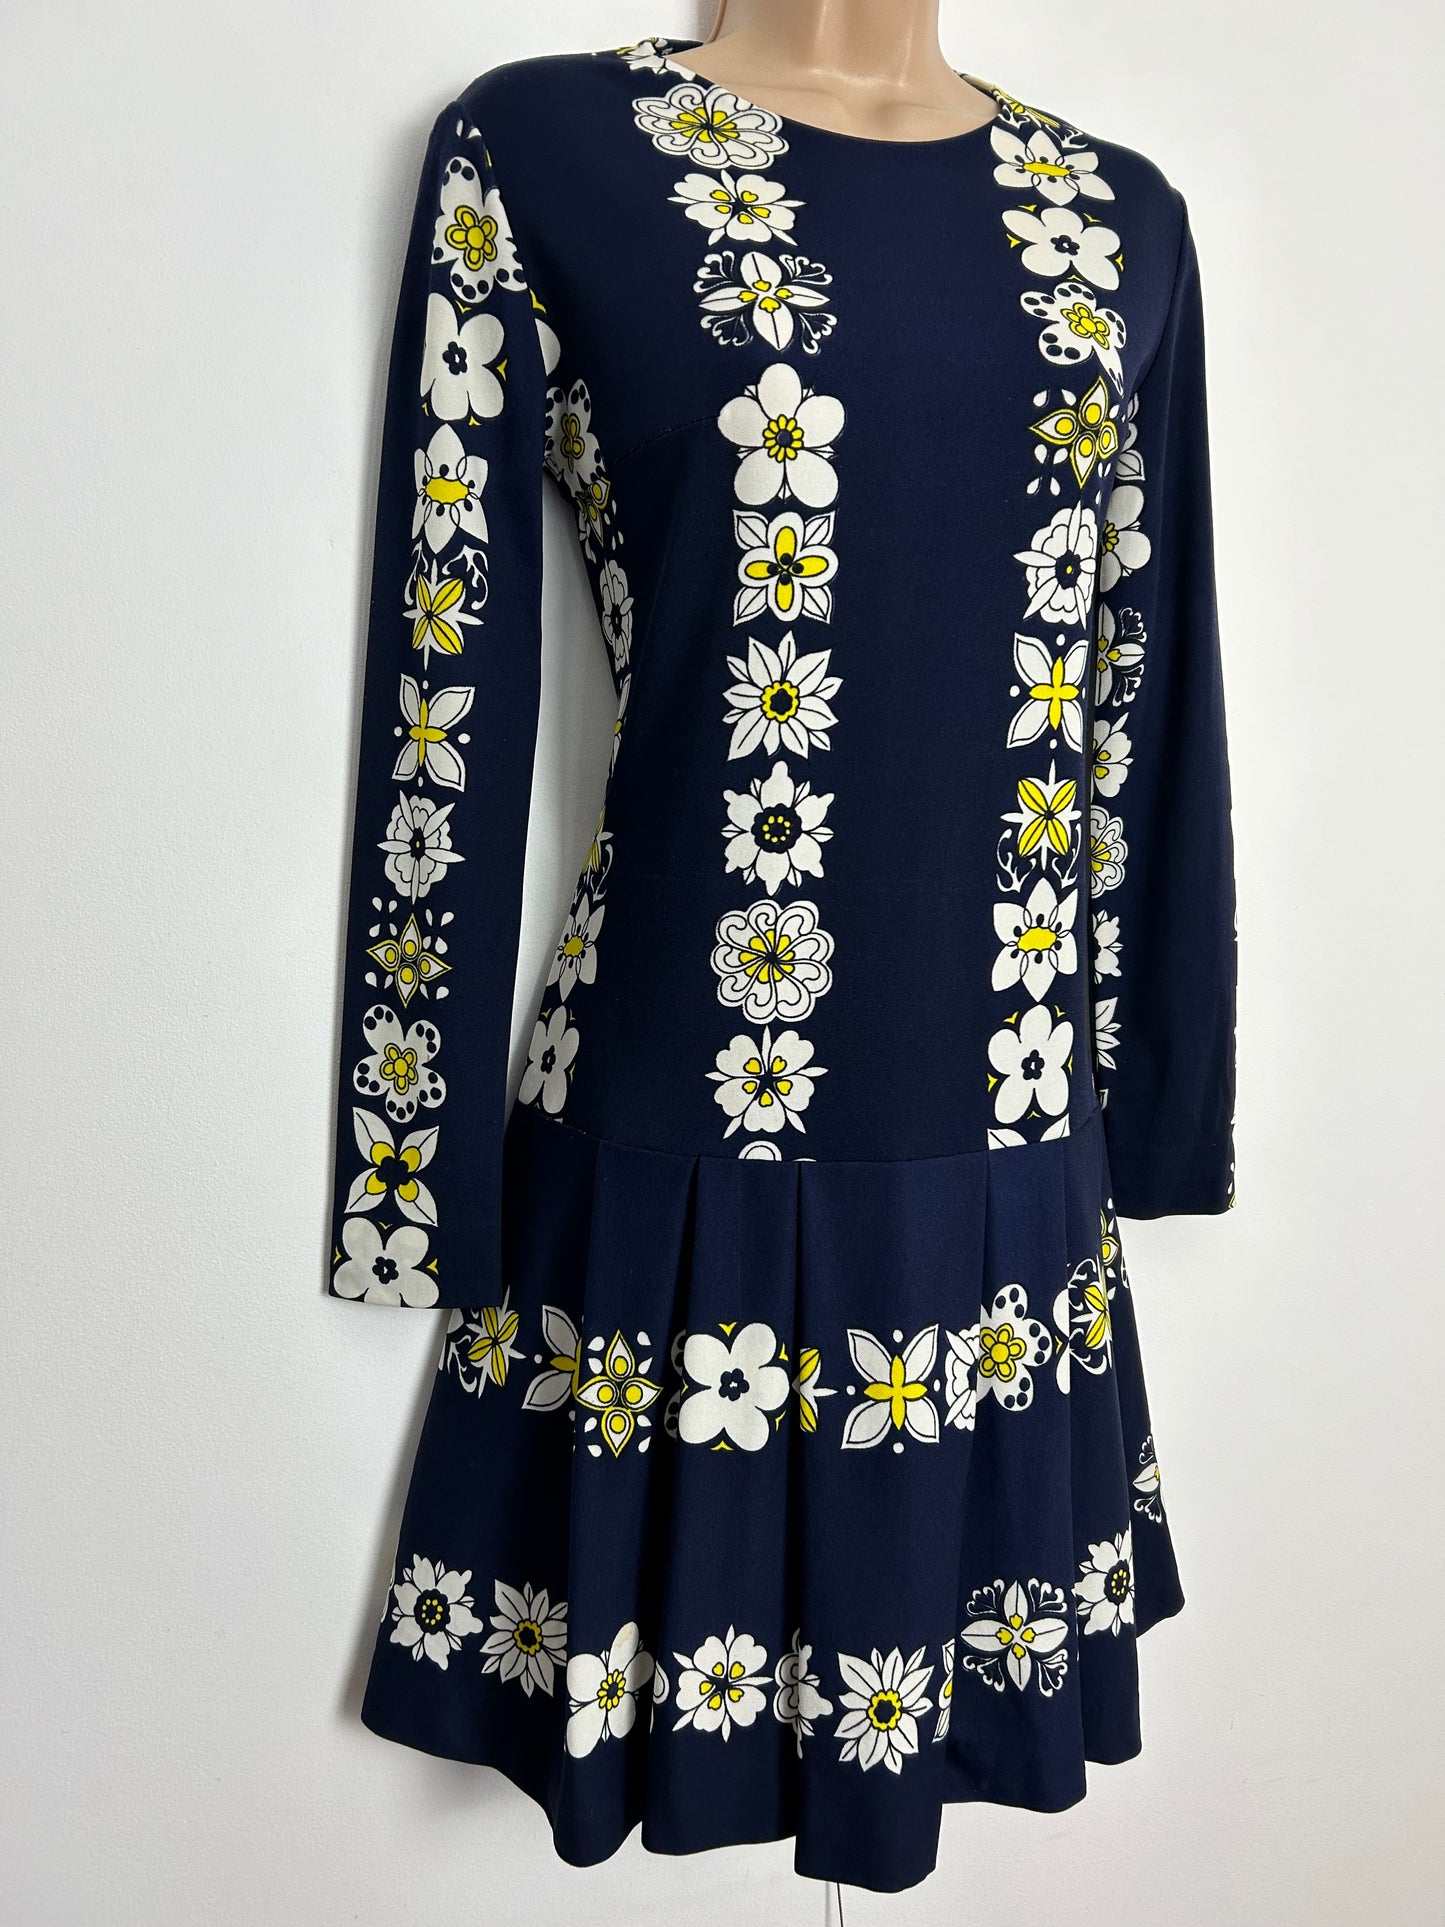 Vintage Early 1970s UK Size 8 Navy Blue White & Yellow Floral Print Long Sleeve Pleated Shift Dress